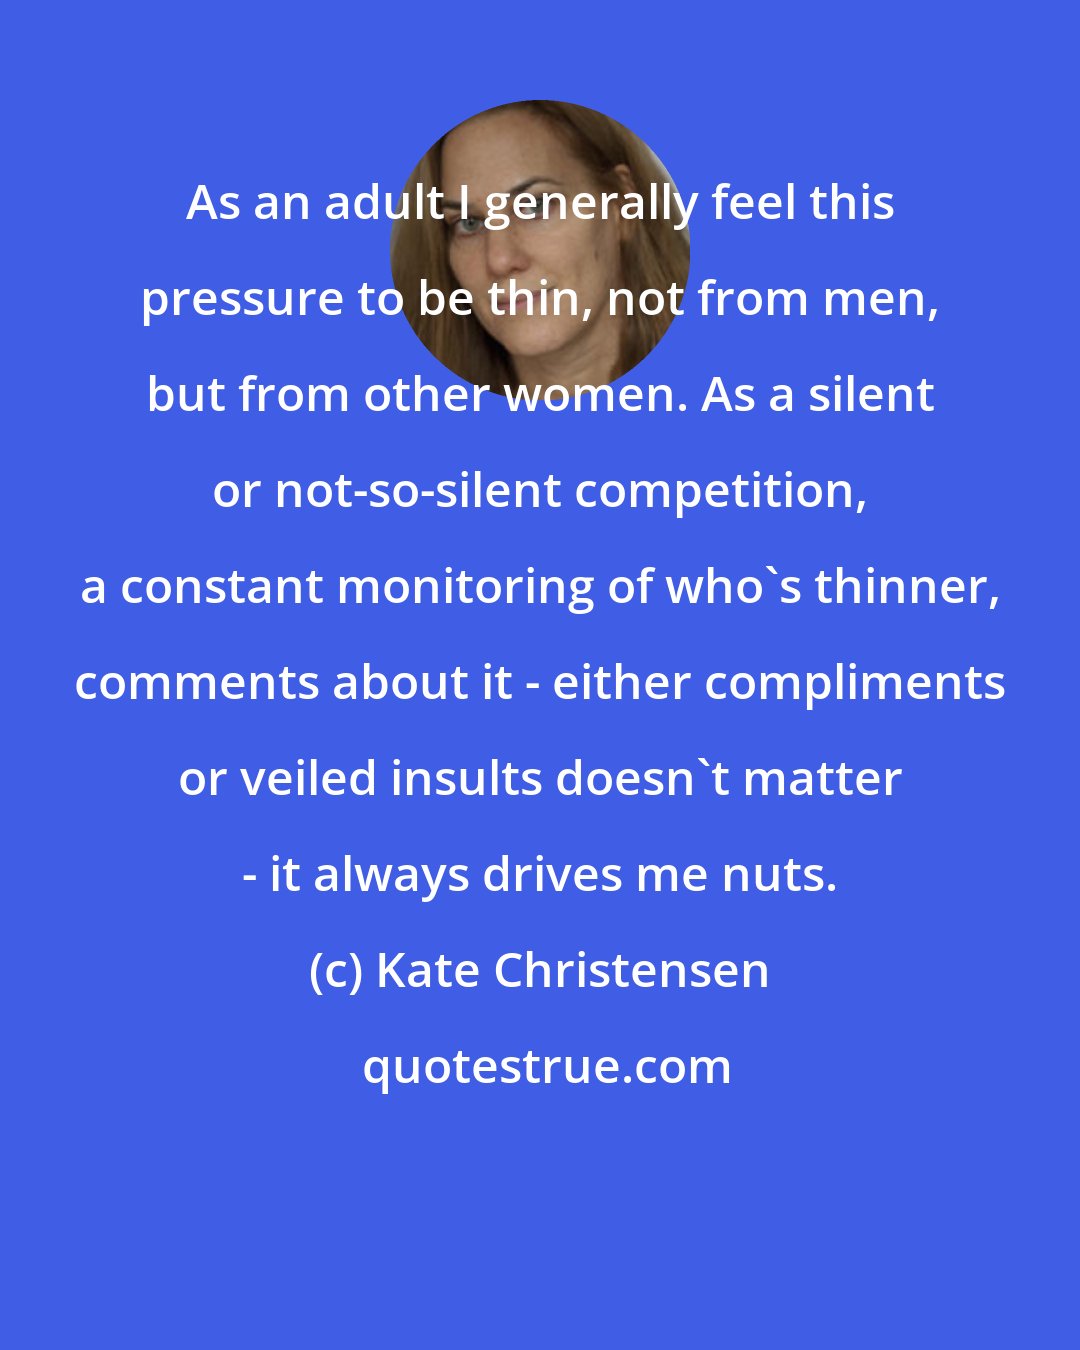 Kate Christensen: As an adult I generally feel this pressure to be thin, not from men, but from other women. As a silent or not-so-silent competition, a constant monitoring of who's thinner, comments about it - either compliments or veiled insults doesn't matter - it always drives me nuts.